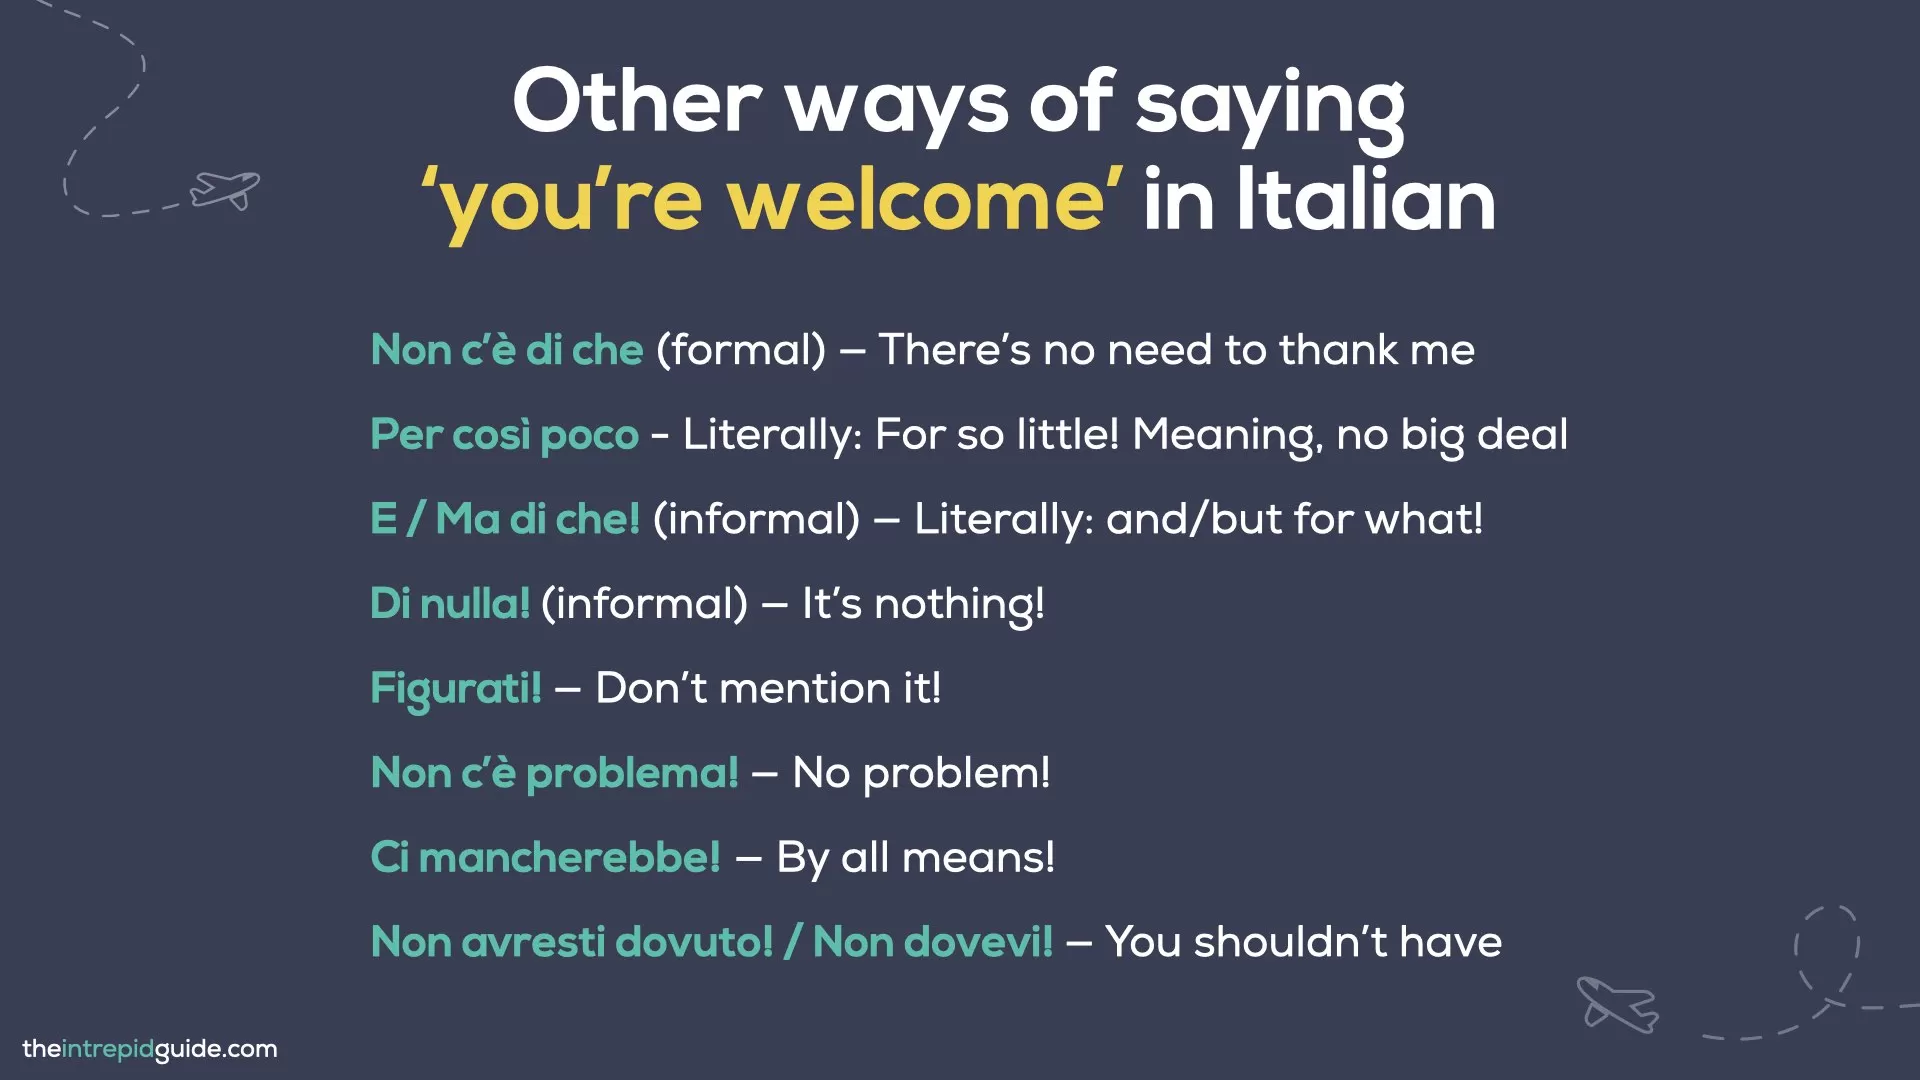 How to say thank you in Italian - Other Ways to say you're welcome in Italian